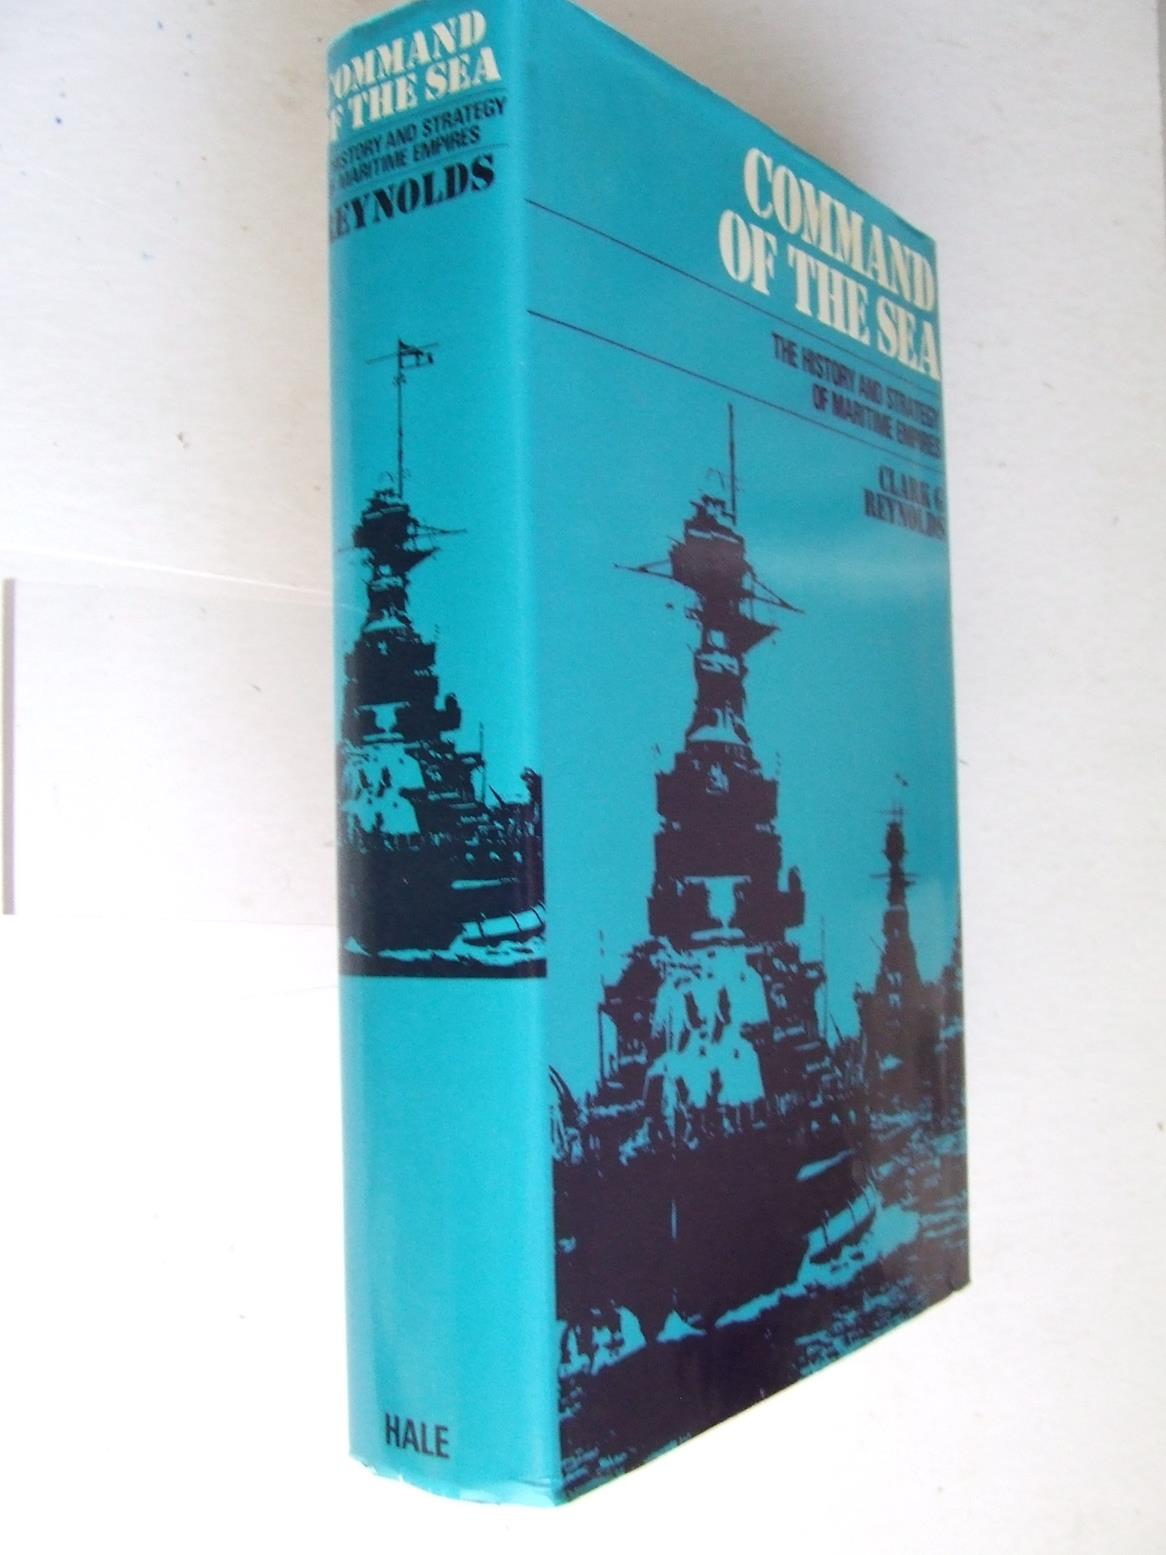 Command of the Sea, the history and strategy of maritime empires